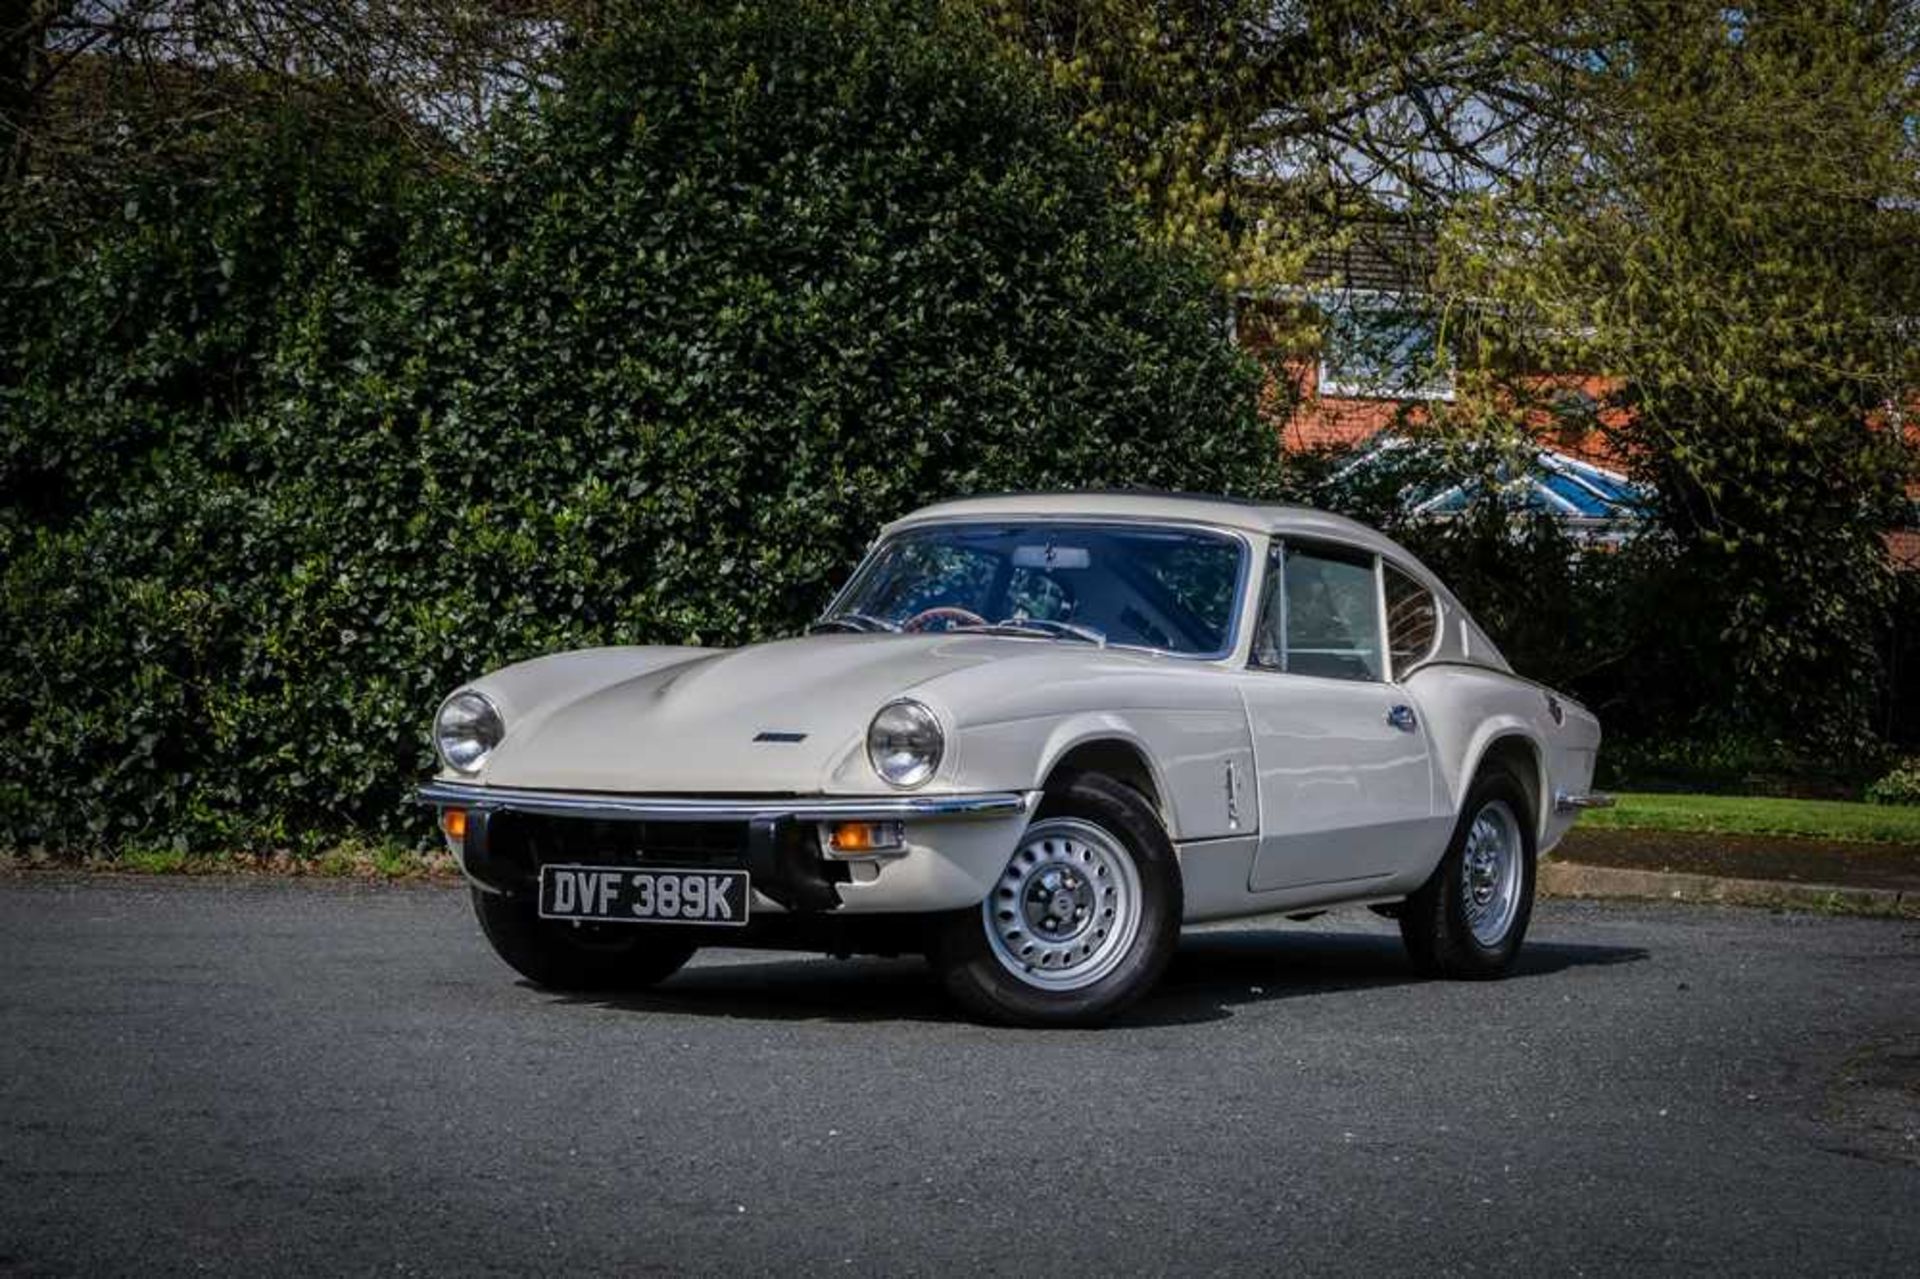 1971 Triumph GT6 MkIII Fresh from a full professional restoration - Image 15 of 106